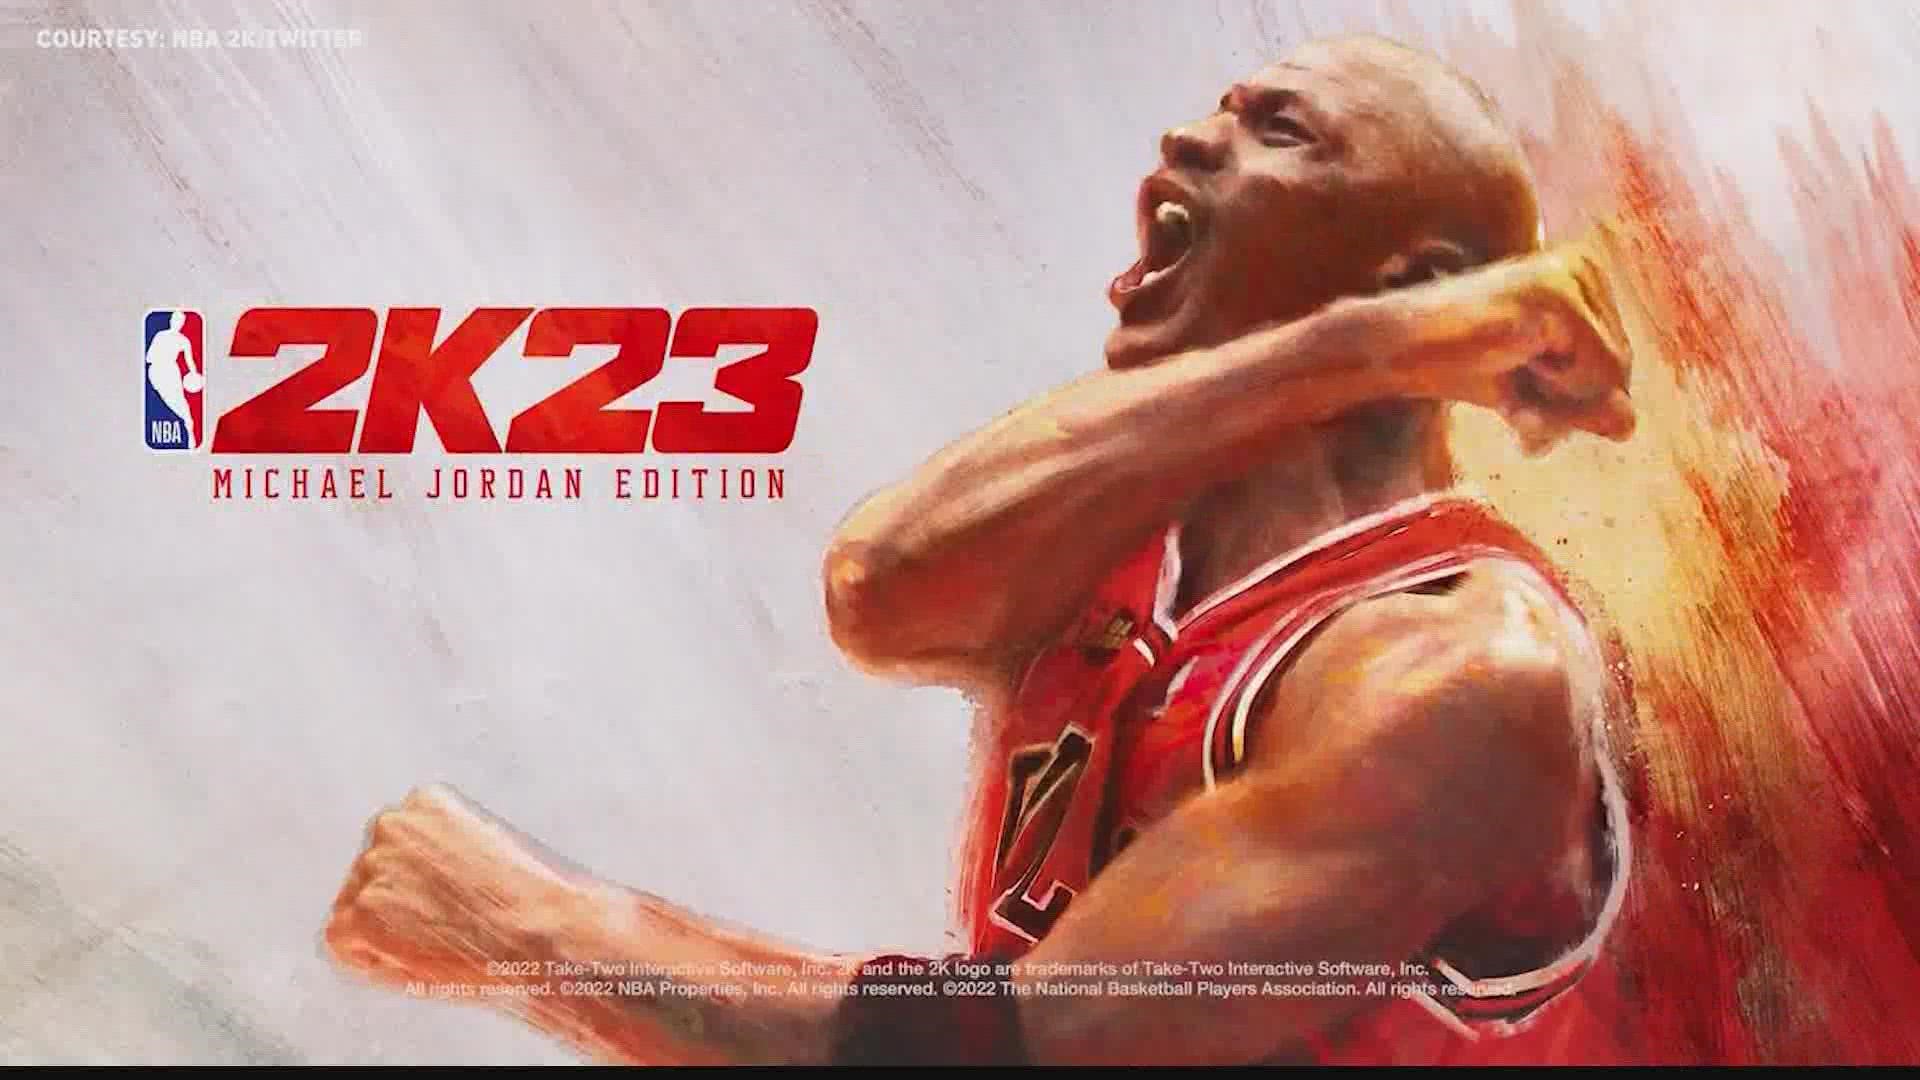 2K Sports announced today that Michael Jordan will grace the cover of NBA 2K23